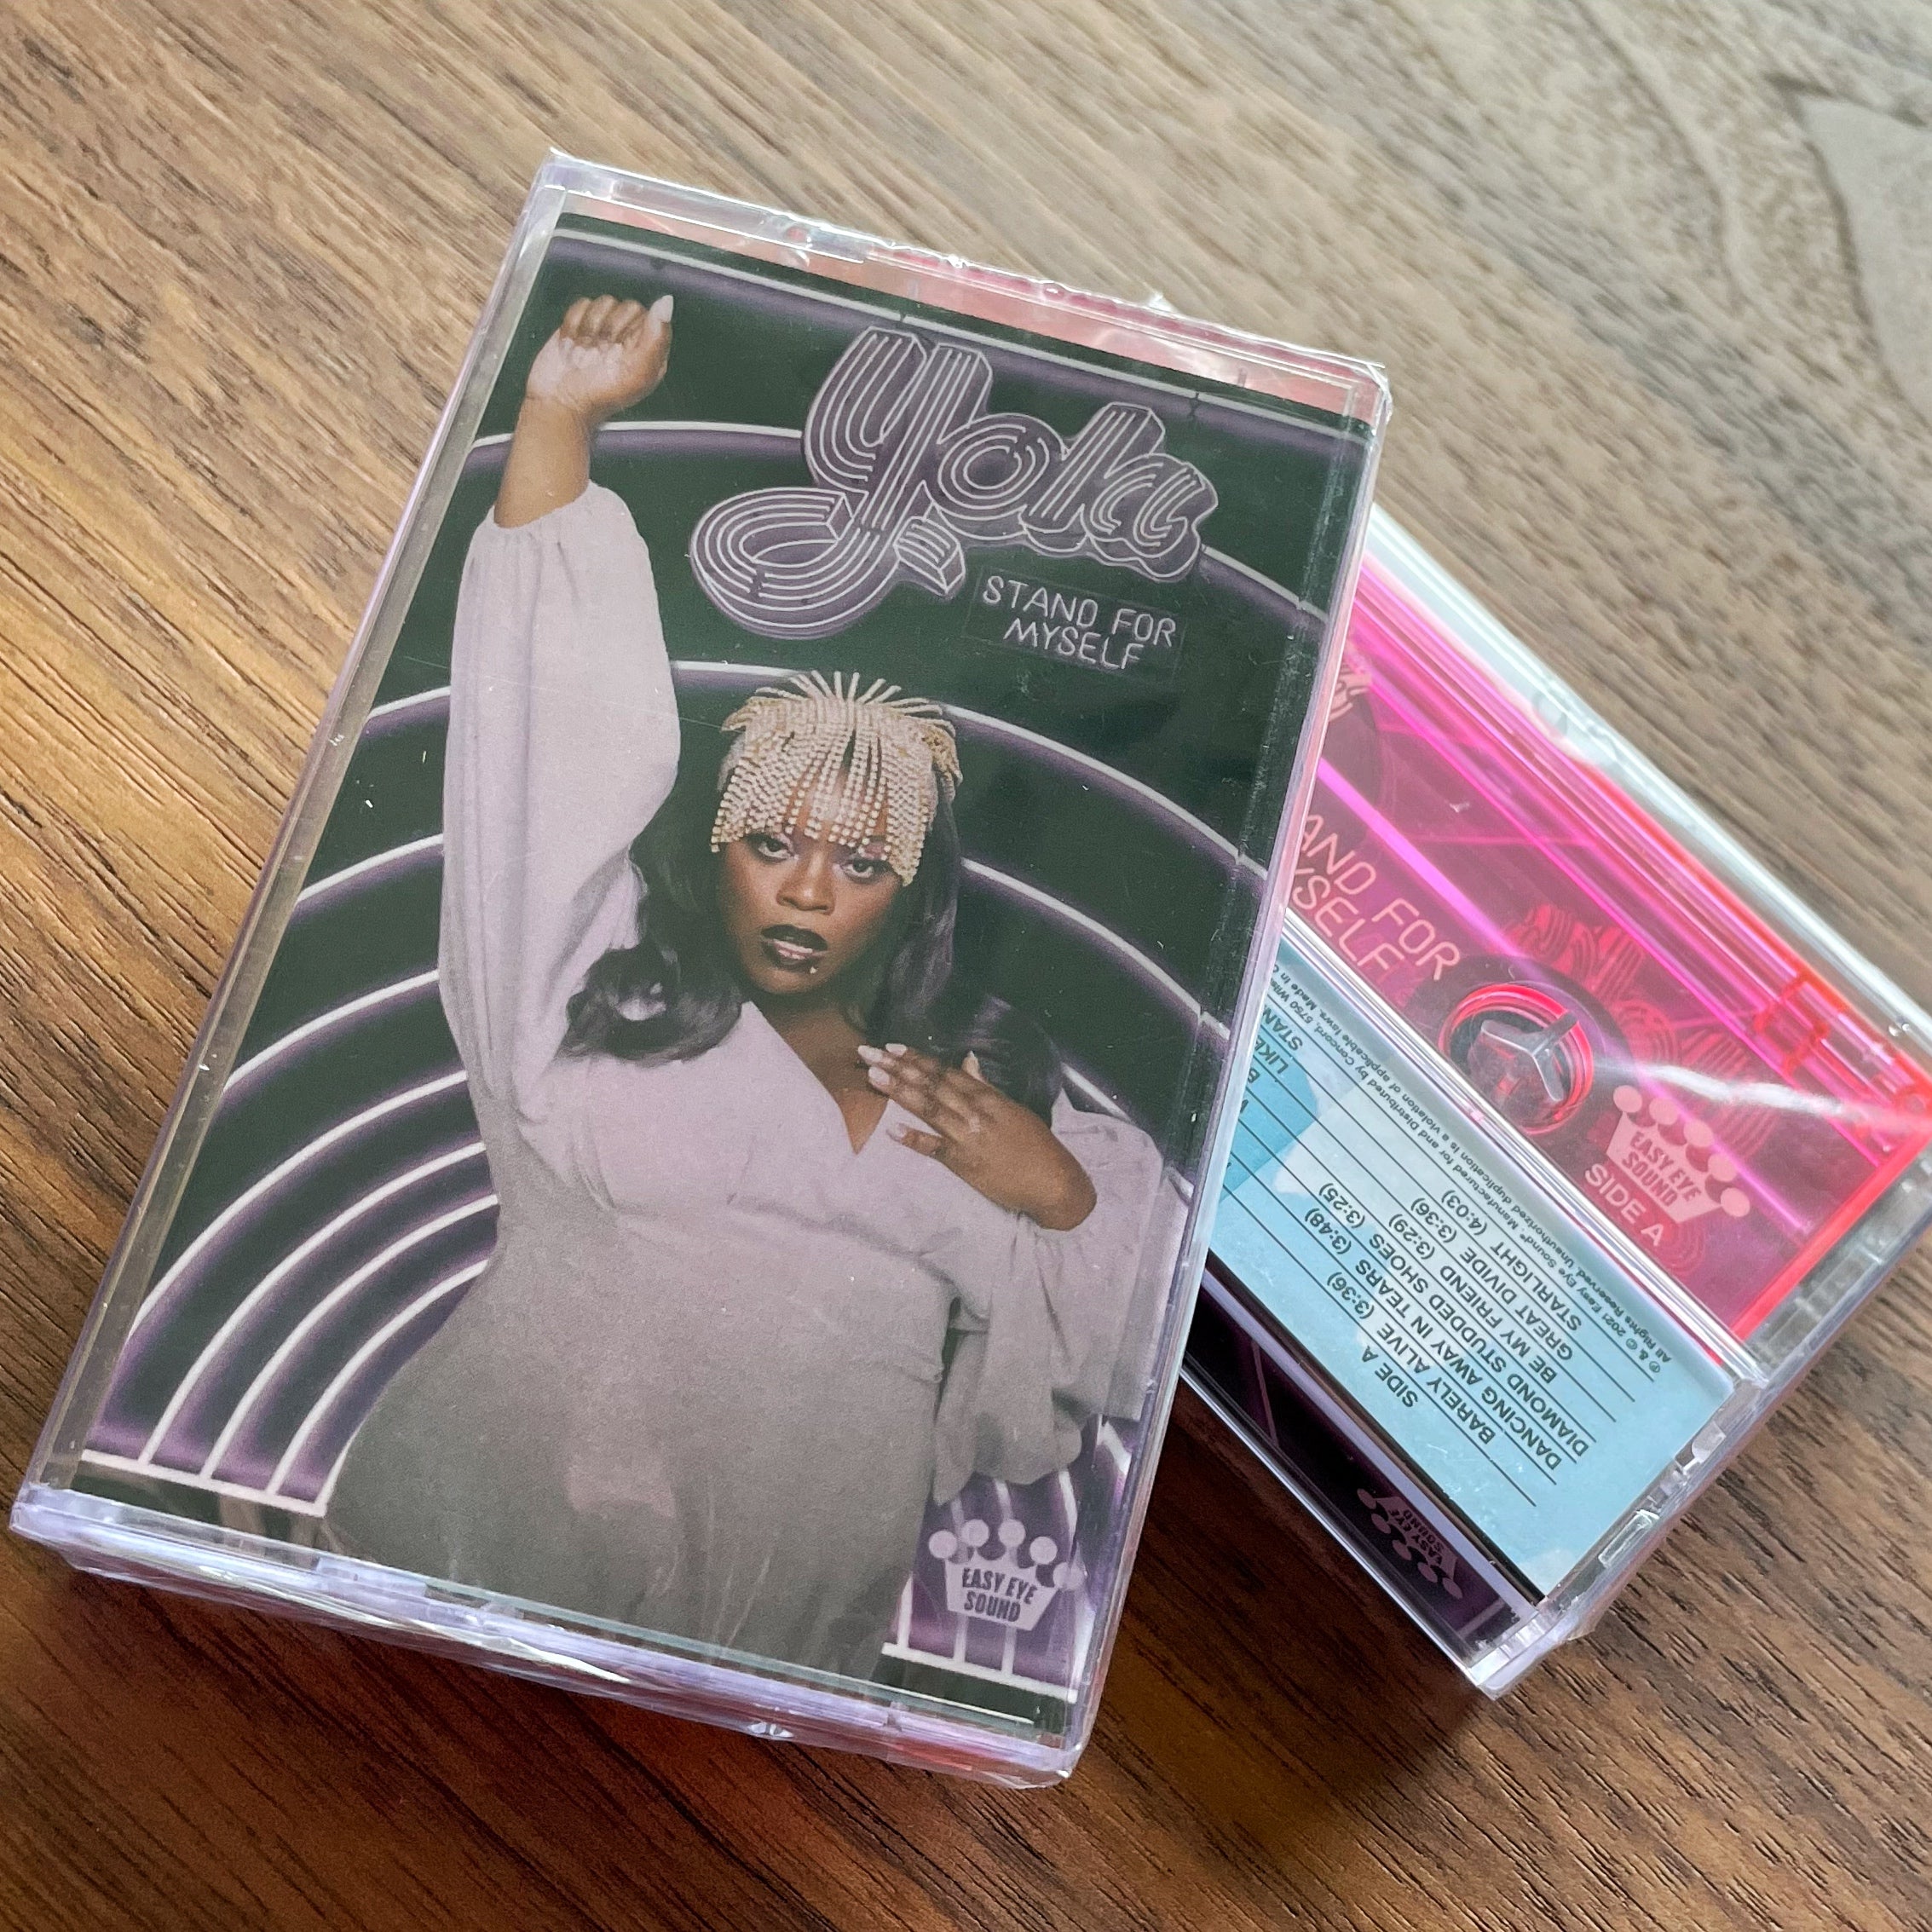 Yola - Stand For Myself [Cassette]